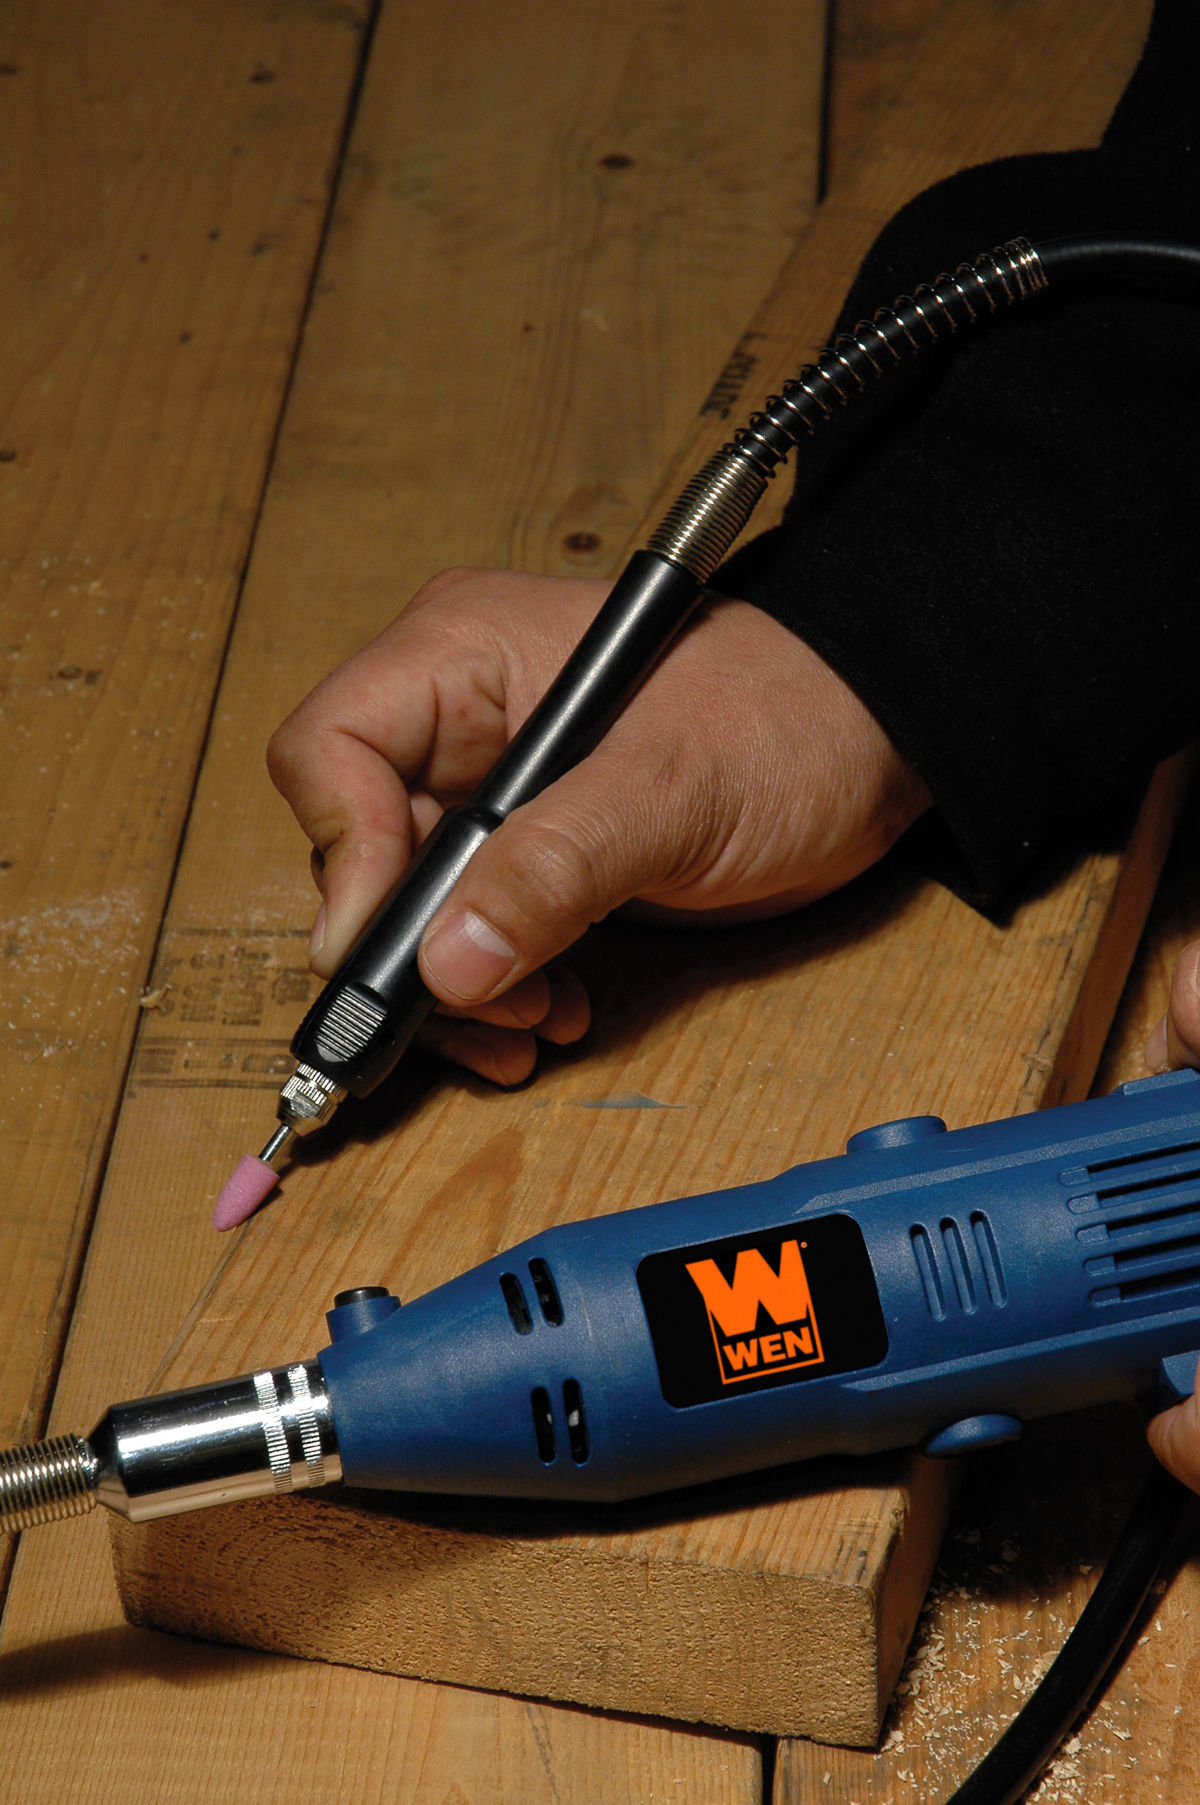 WEN Rotary Tool Kit with Flex Shaft, 2305 - image 5 of 6